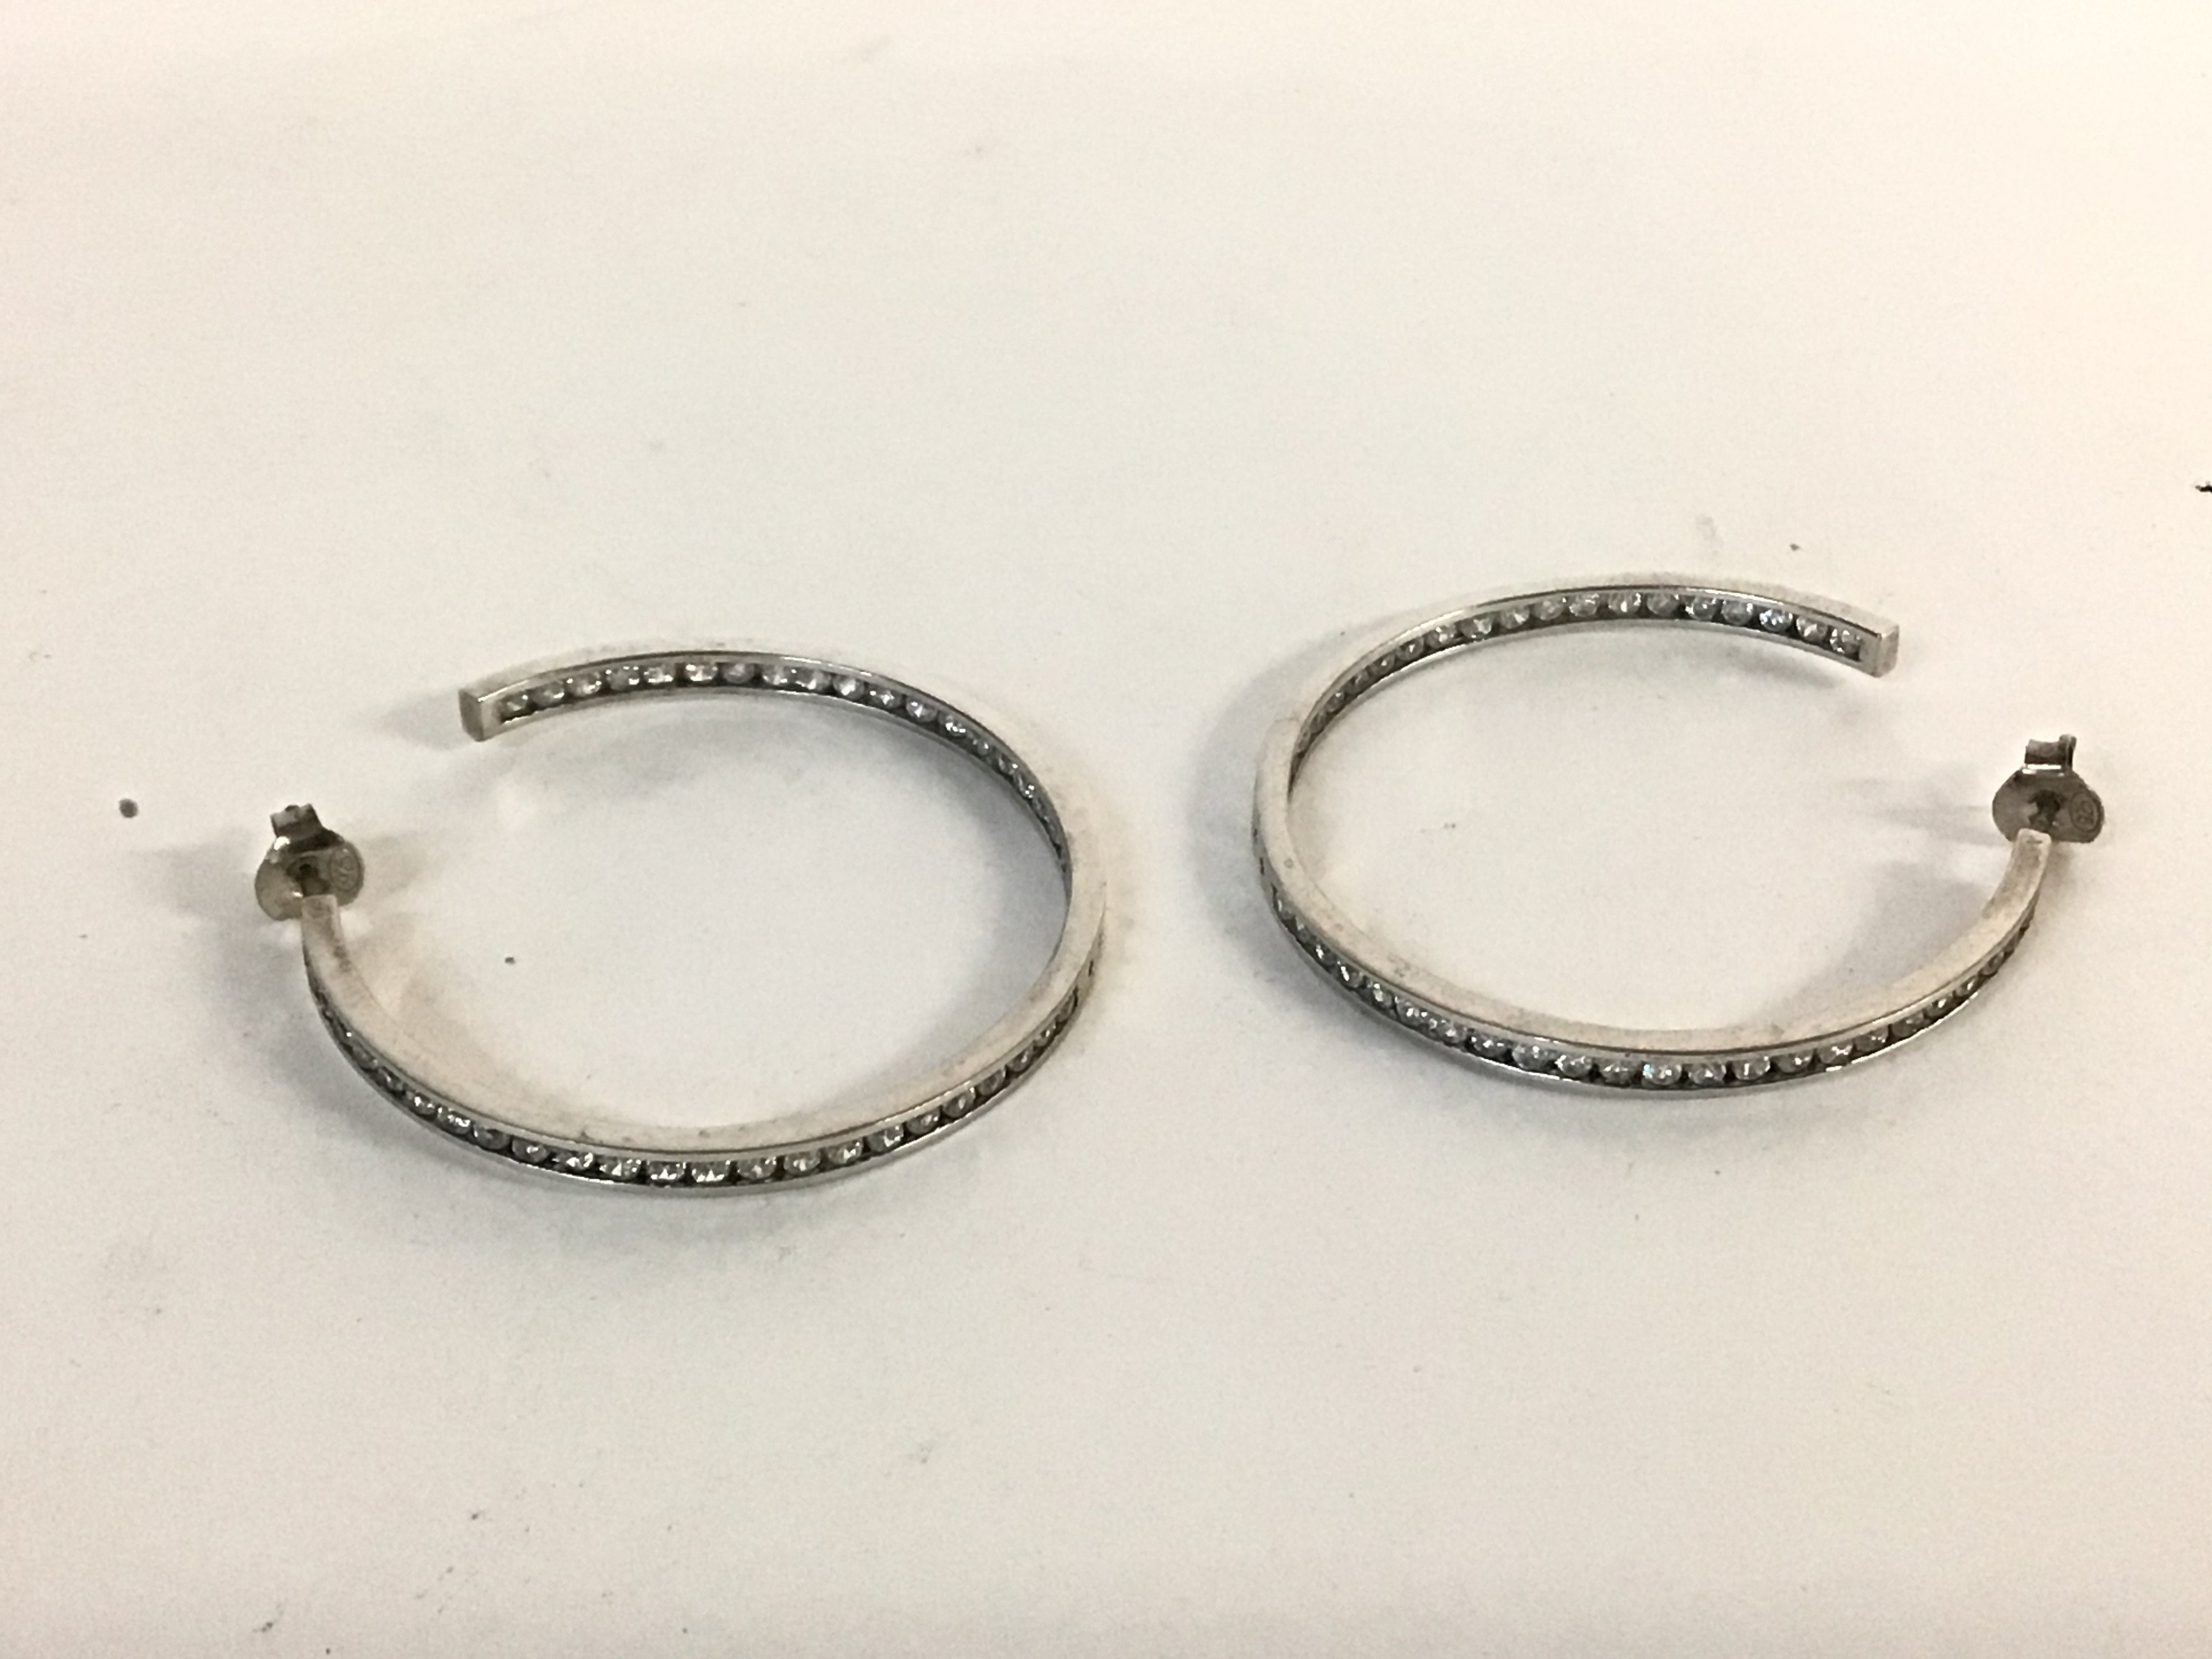 A pair of silver hoop earrings set with white ston - Image 2 of 2